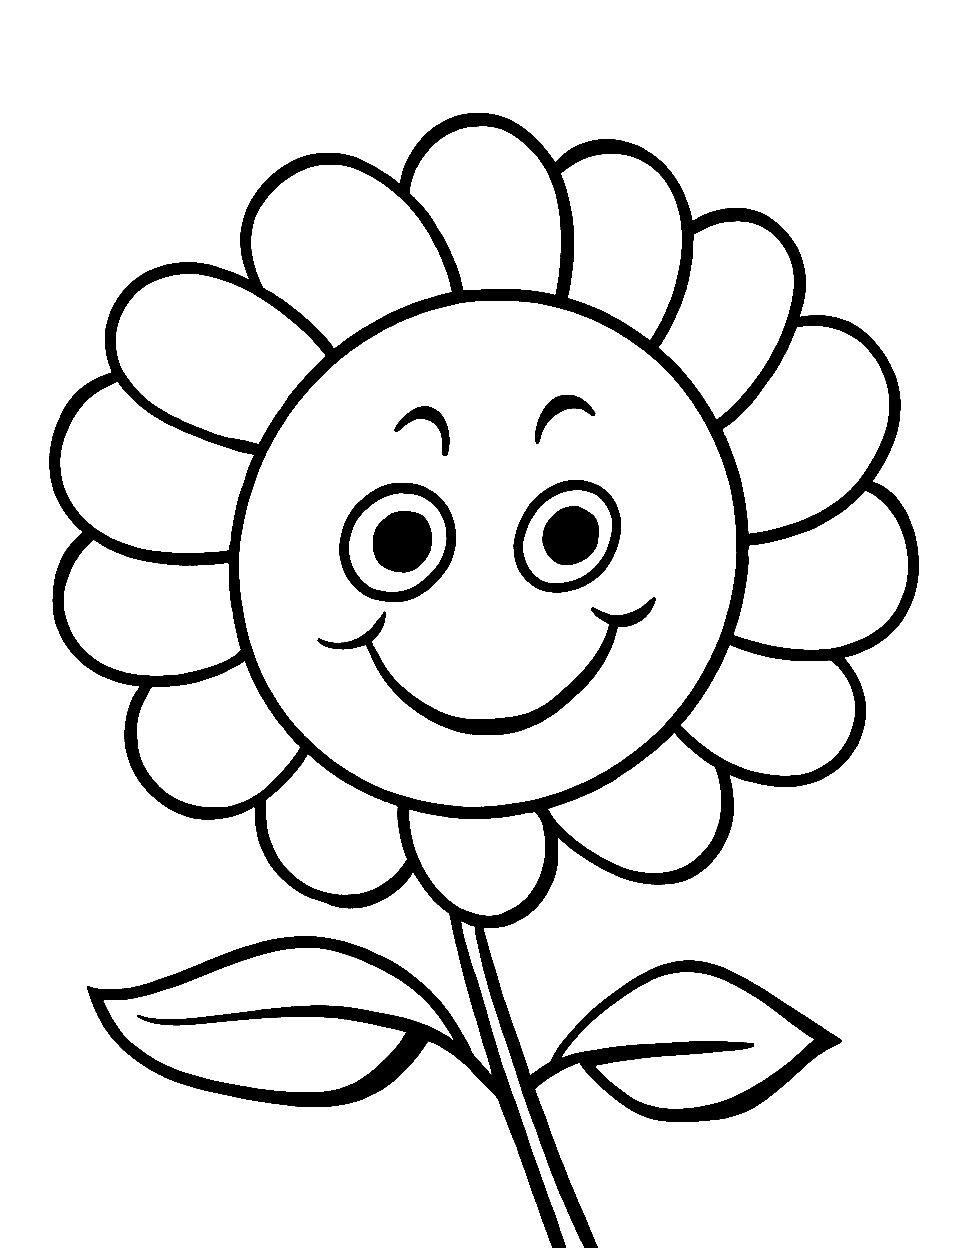 Sunflower Smiles Coloring Page - A sunflower with a smiling face.